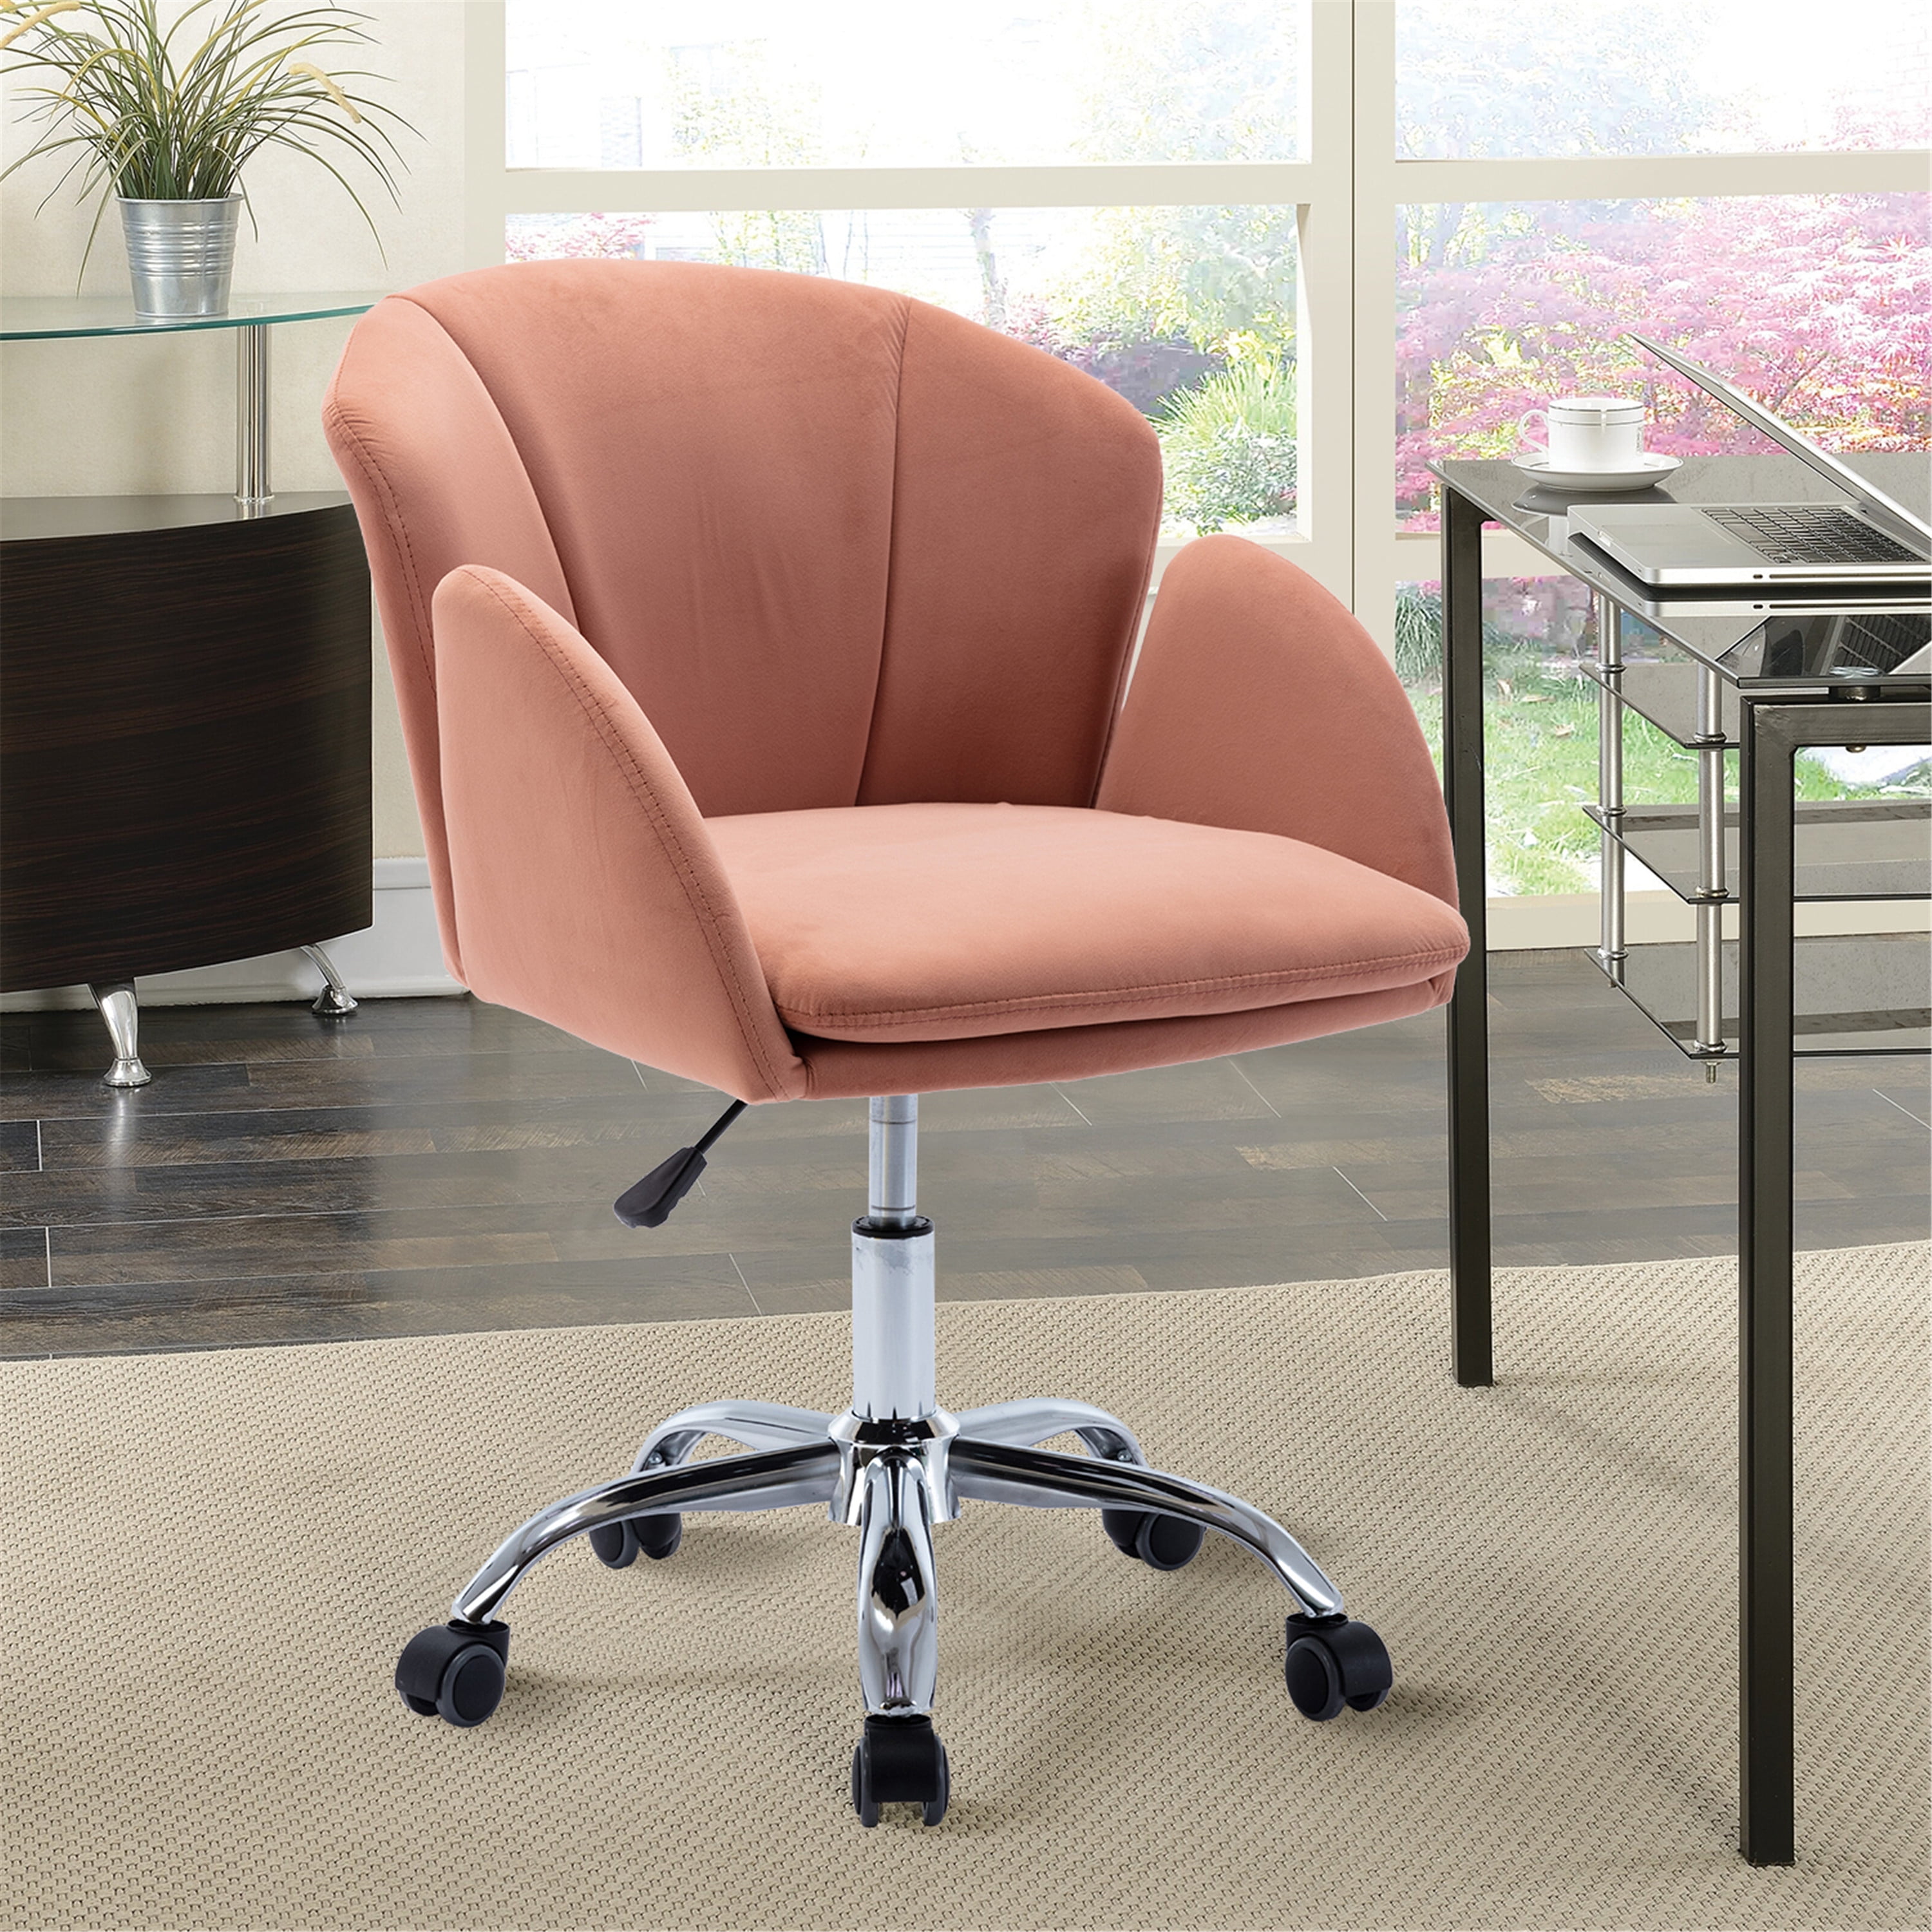 Pink Velvet Material. Home Computer Chair Office Chair Adjustable 360  °Swivel Cushion Chair With Black Foot Swivel Chair Makeup Chair Study Desk